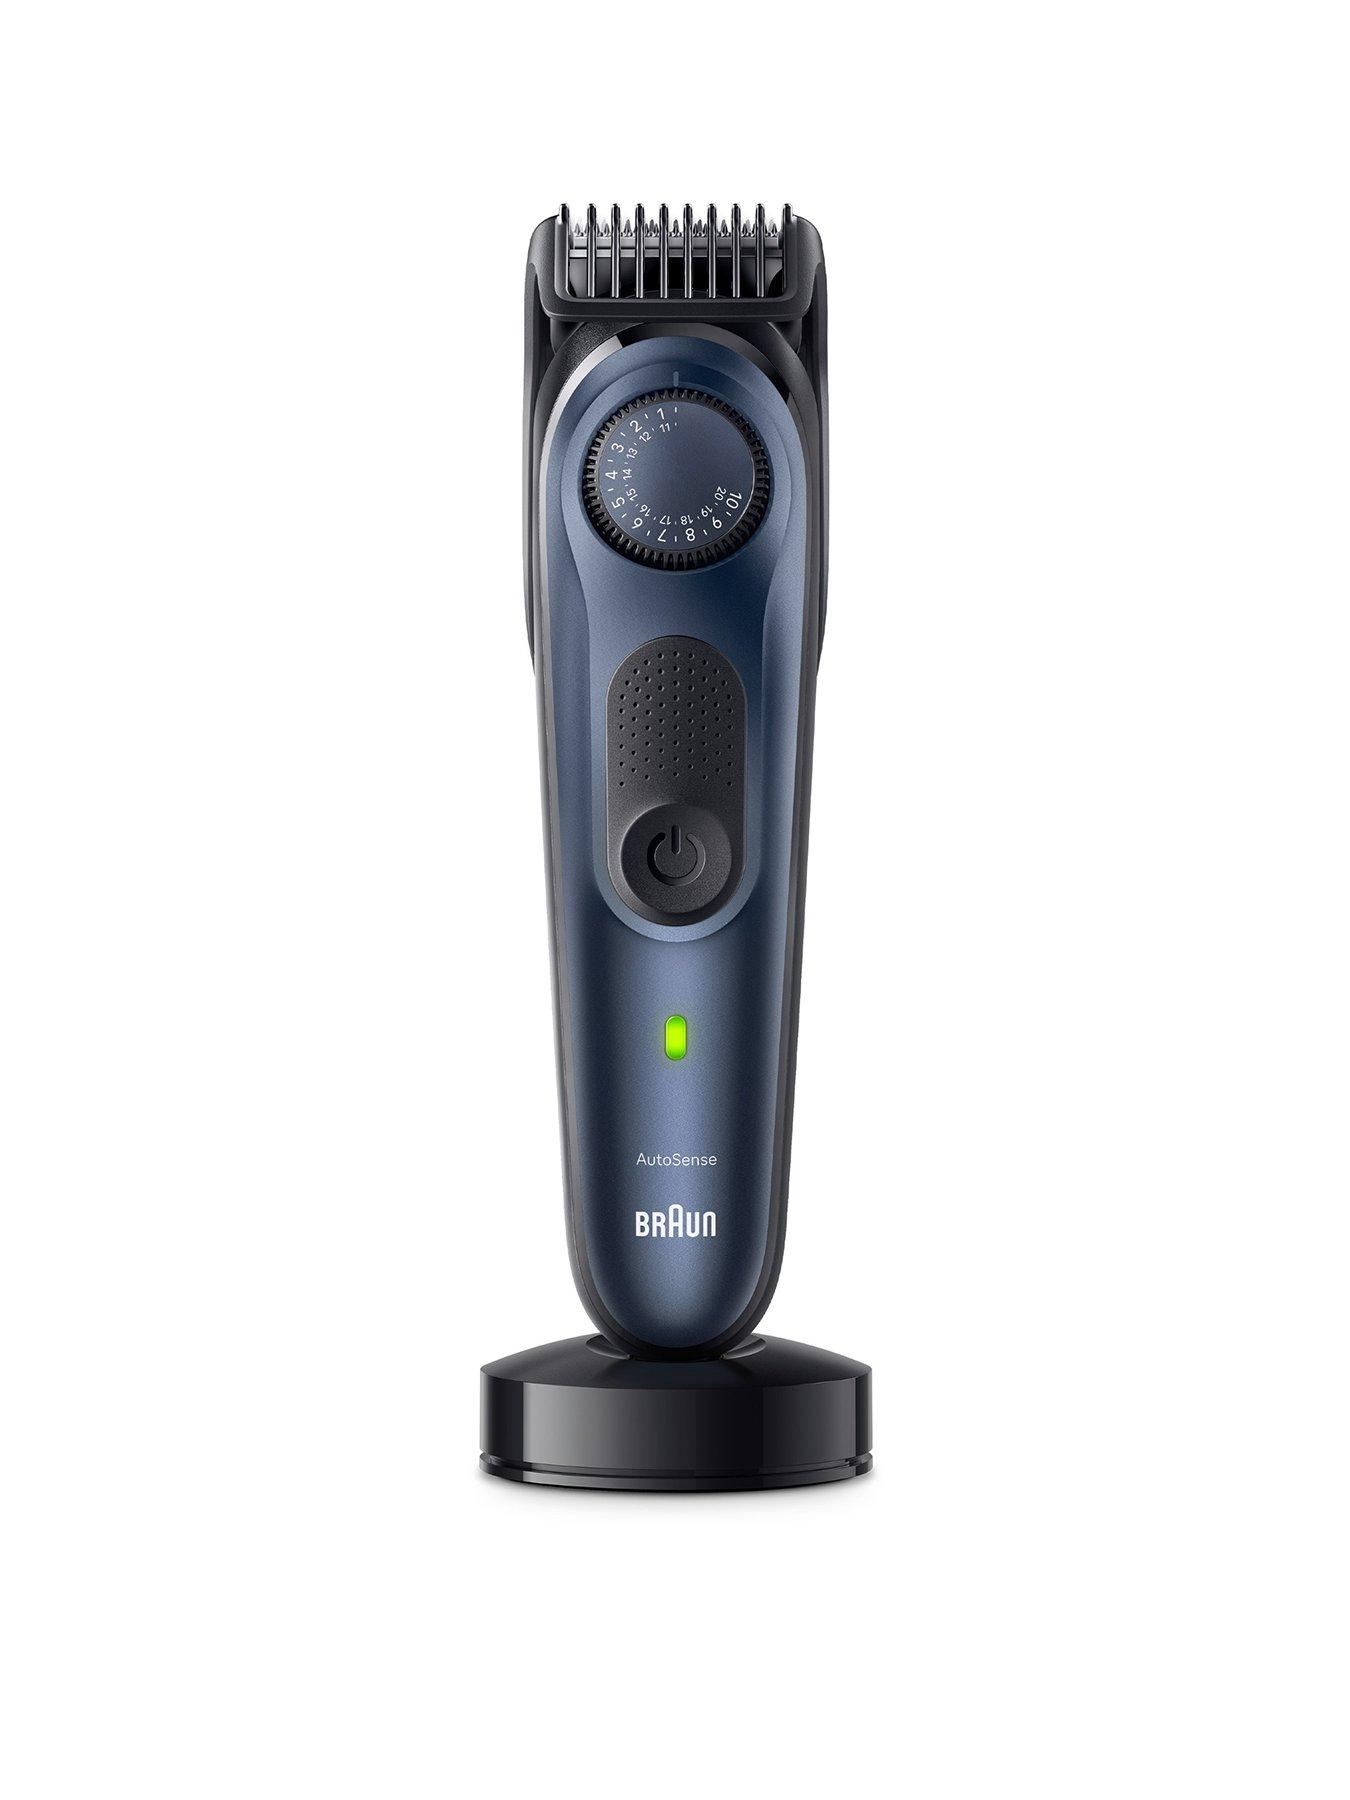 Natur Stearinlys kemikalier Braun Beard Trimmer Series 7 BT7421, Trimmer With Barber Tools And 100-min  Runtime | very.co.uk